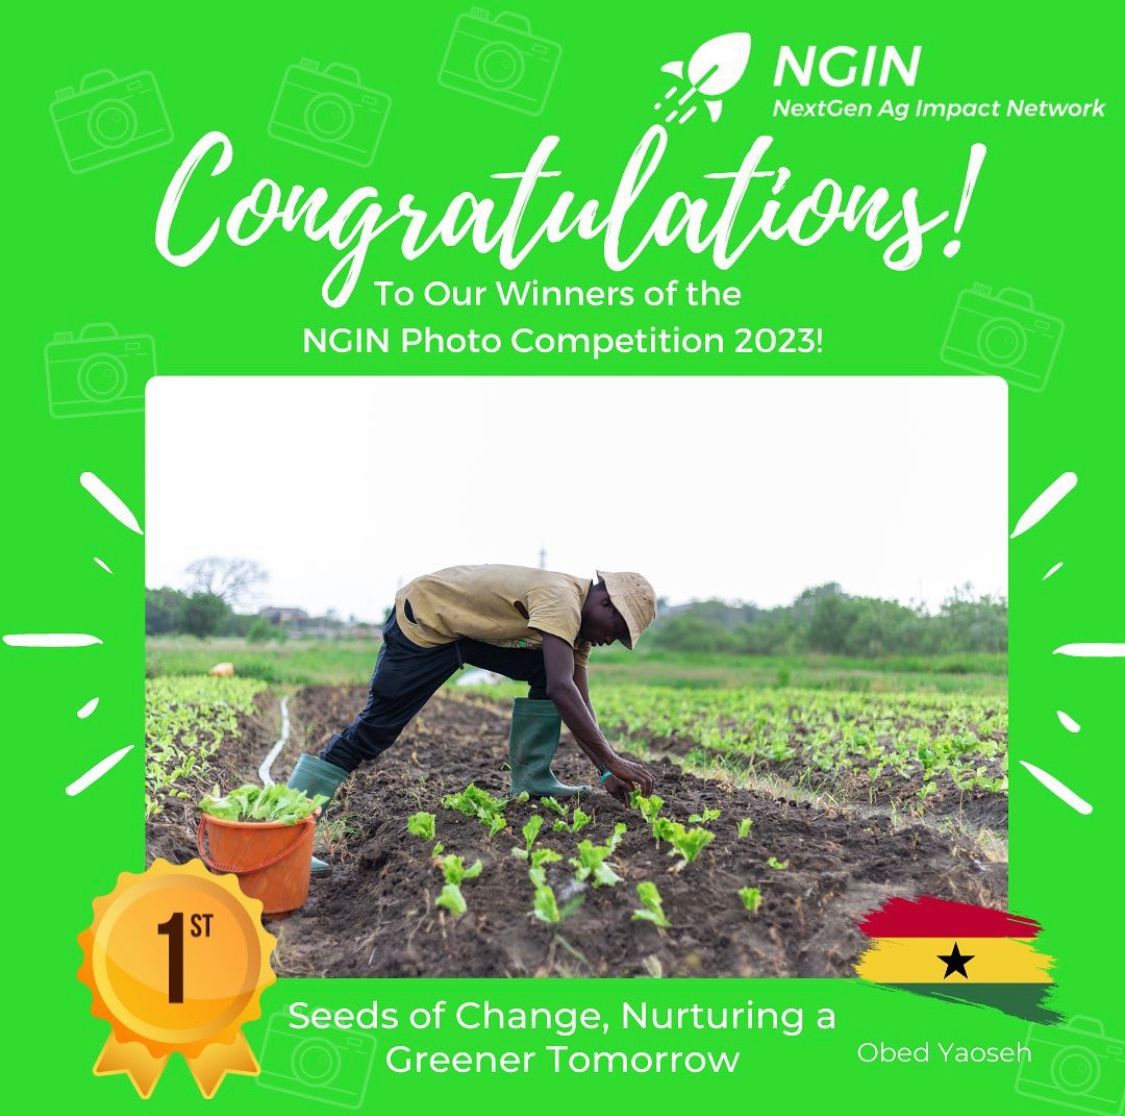 THE WINNERS OF THE 2023 NGINS PHOTO COMPETITION